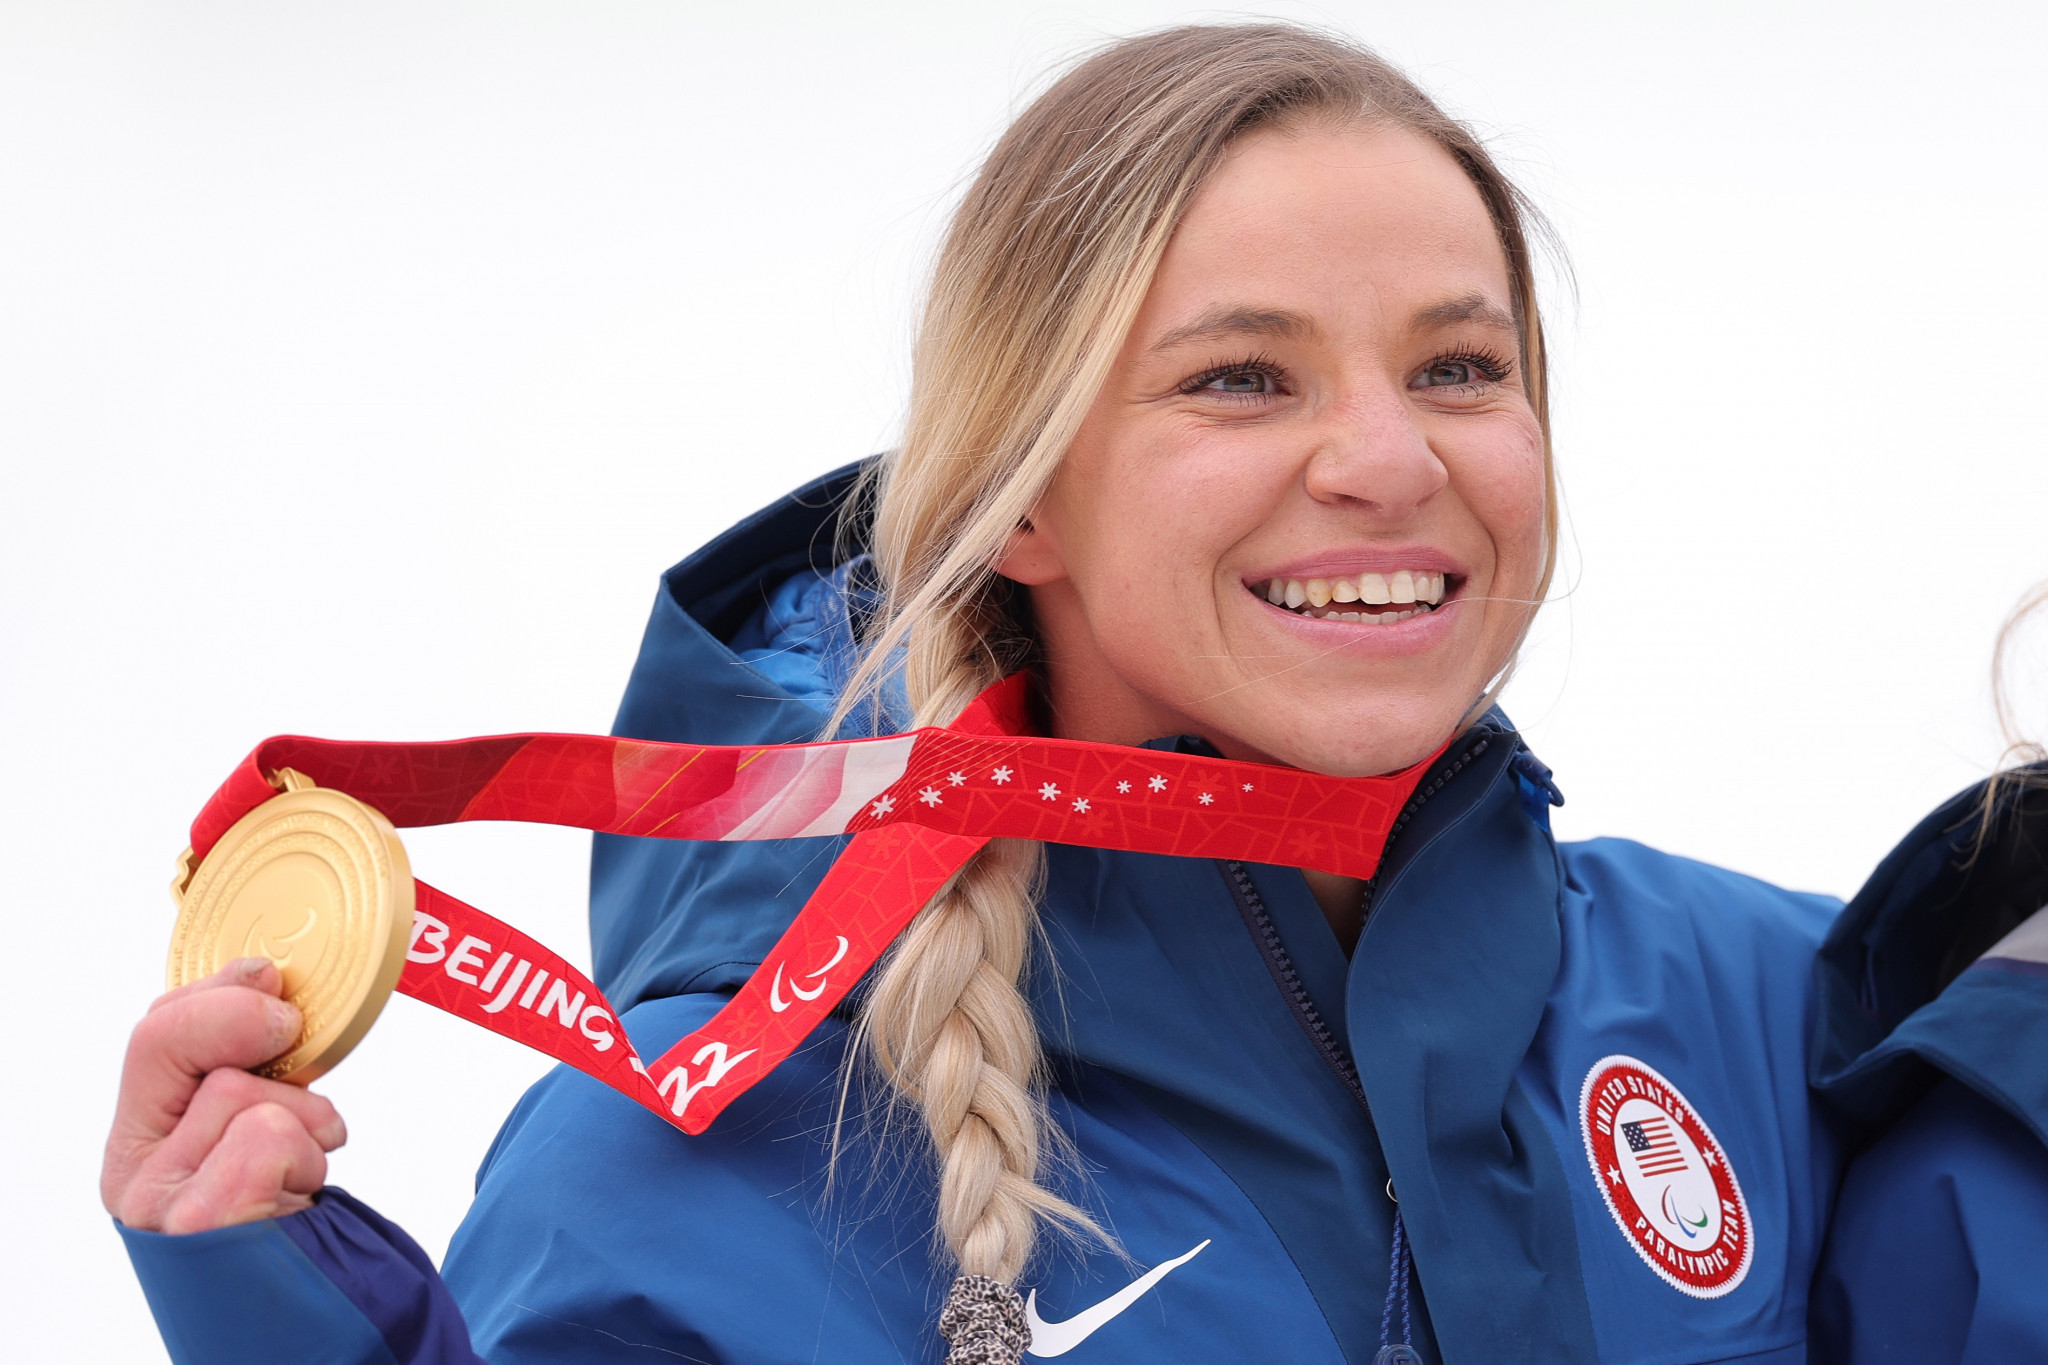 Oksana Masters of the United States won medals in all seven of her events at the Beijing 2022 Winter Paralympics ©Getty Images